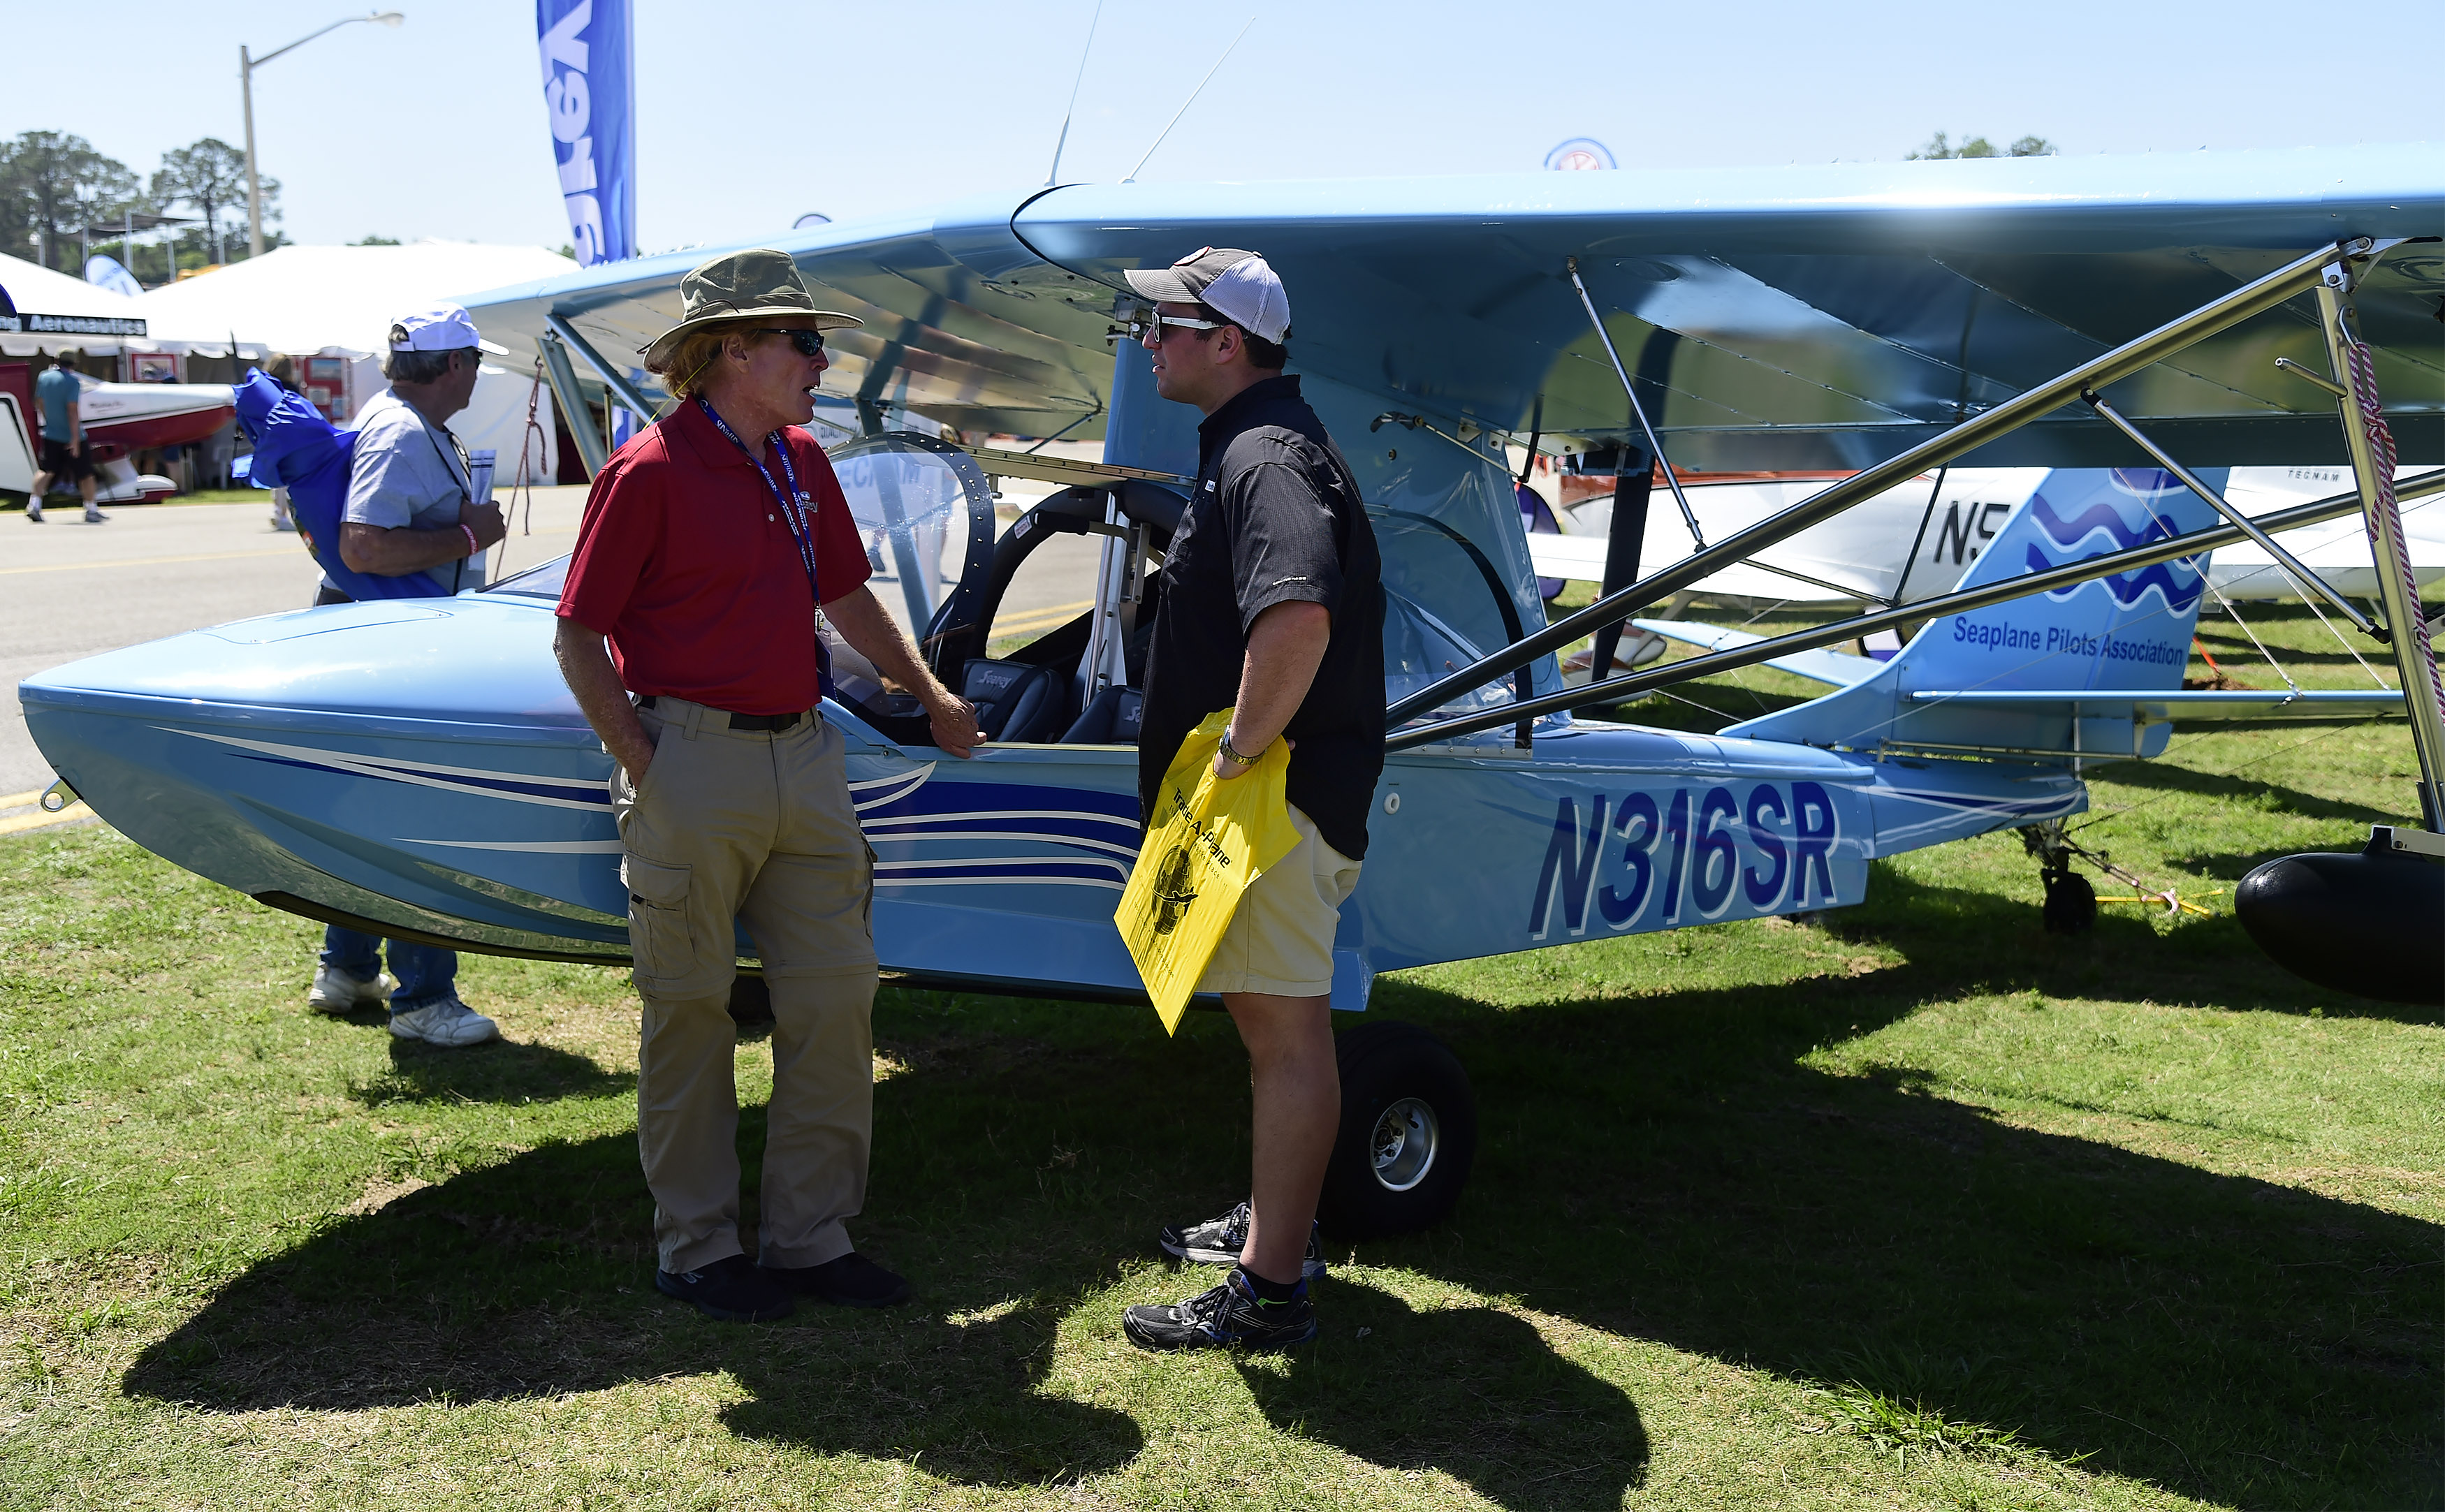 The Seaplane Pilots Association plans to use a blue Searey Adventure amphibious light sport aircraft for float flying outreach. Photo by David Tulis.